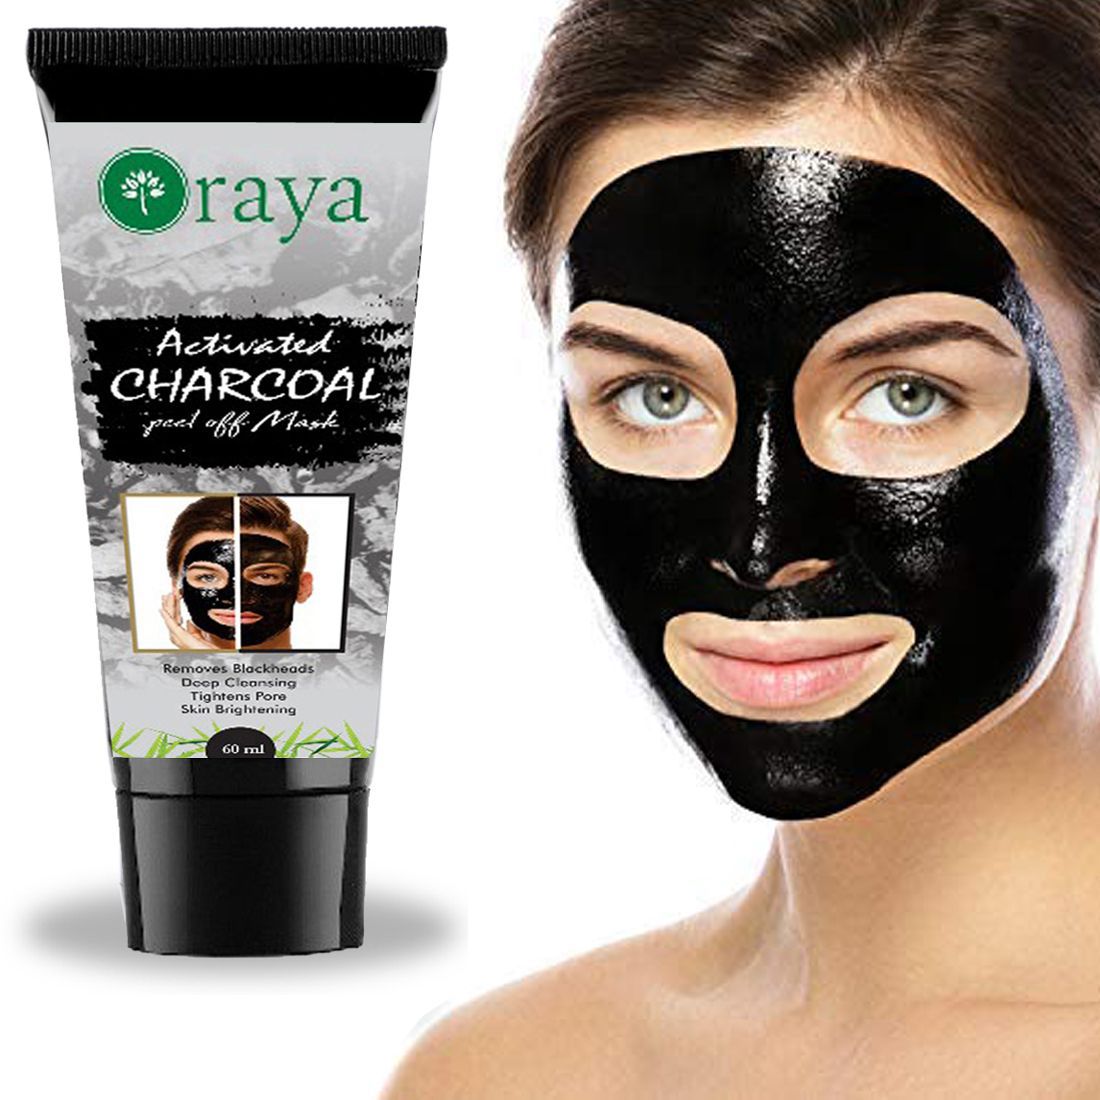 ORAYA Charcoal Blackhead Removal Mask & For Charcoal Face Peel Off ...